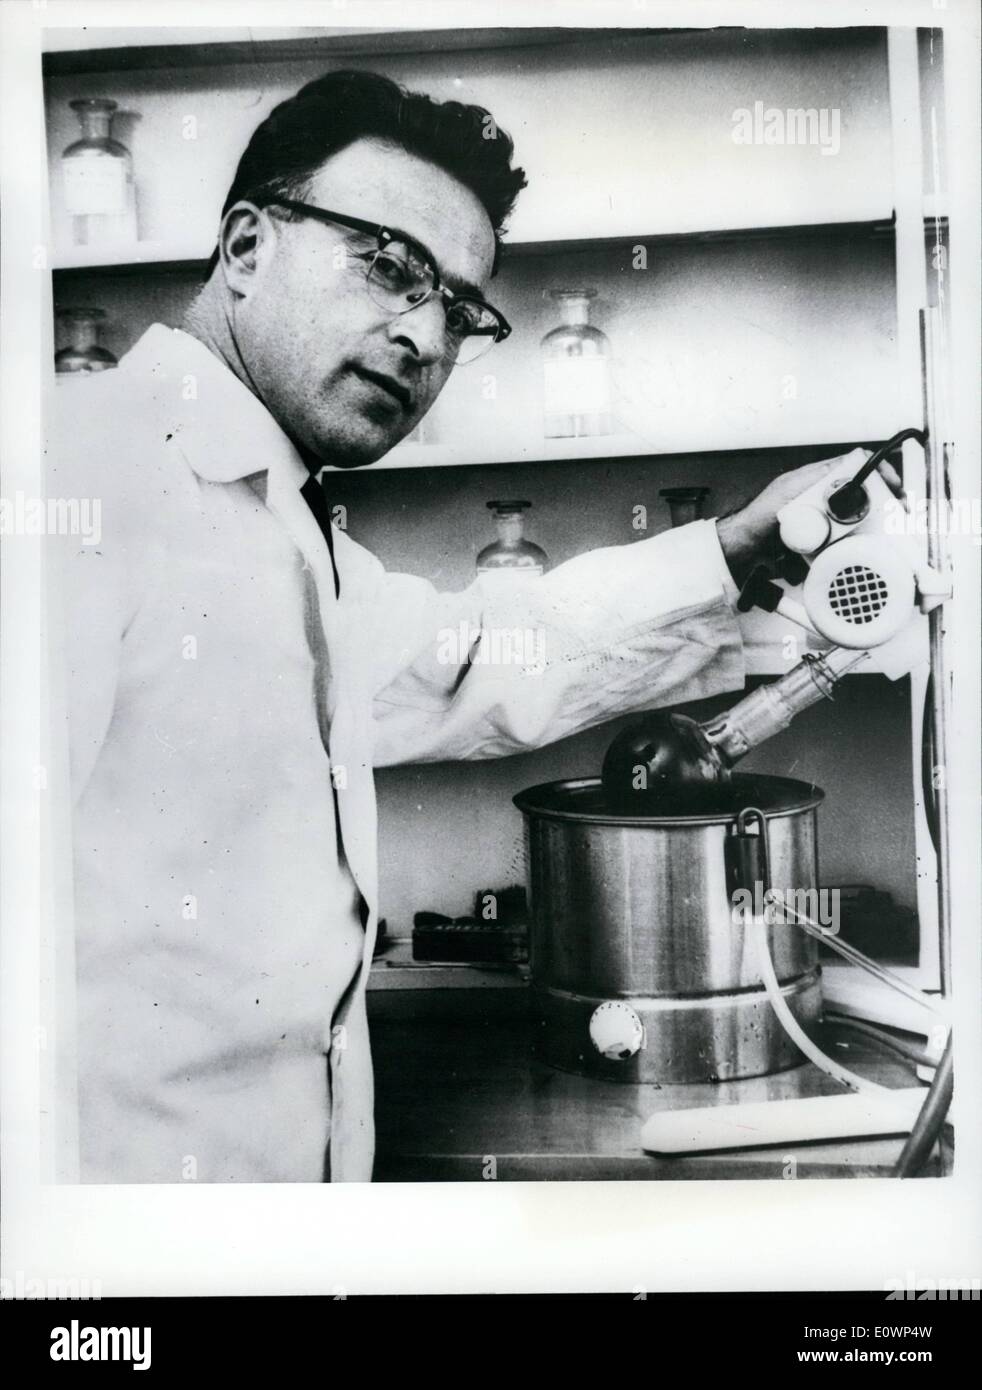 Oct. 29, 1963 - 29-10-63 New hope for blood cancer cure. 38-year old professor Emery Gellert, head of the chemistry department of Wollongong University College in Australia may have made an important break-through in cancer research. He has discovered a compound extracted from a rare vine found mainly in Northern Queensland which has proved highly successful in the treatment of leukemia in animals. It is not yet proved to be successful with humans although tests so far have been very encouraging. It takes 100 lb Stock Photo